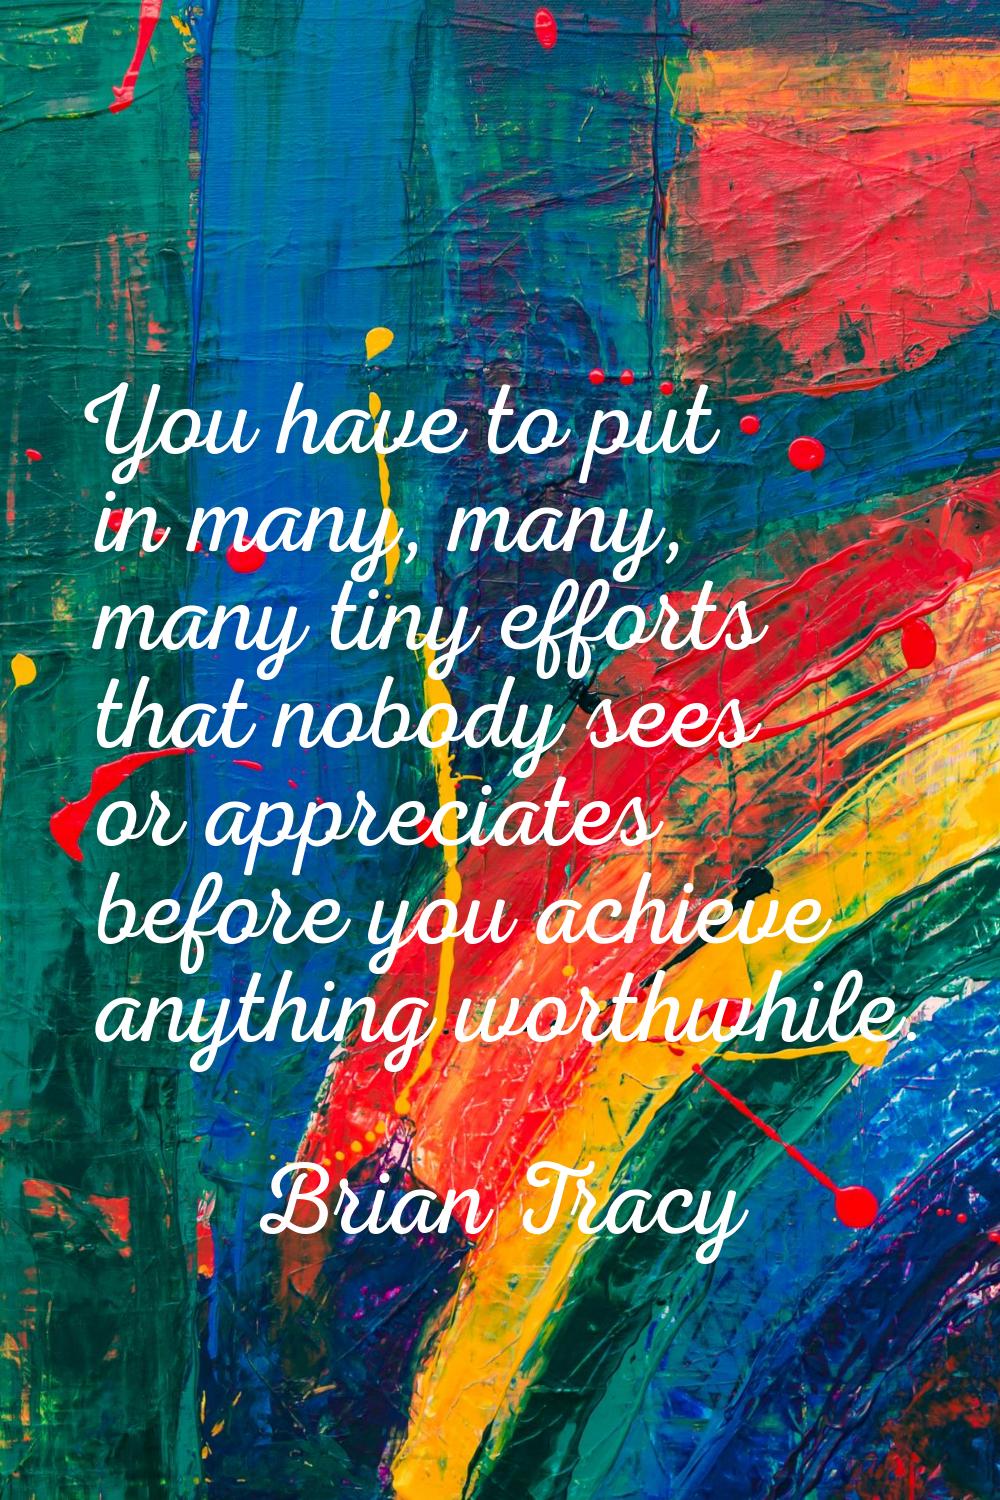 You have to put in many, many, many tiny efforts that nobody sees or appreciates before you achieve